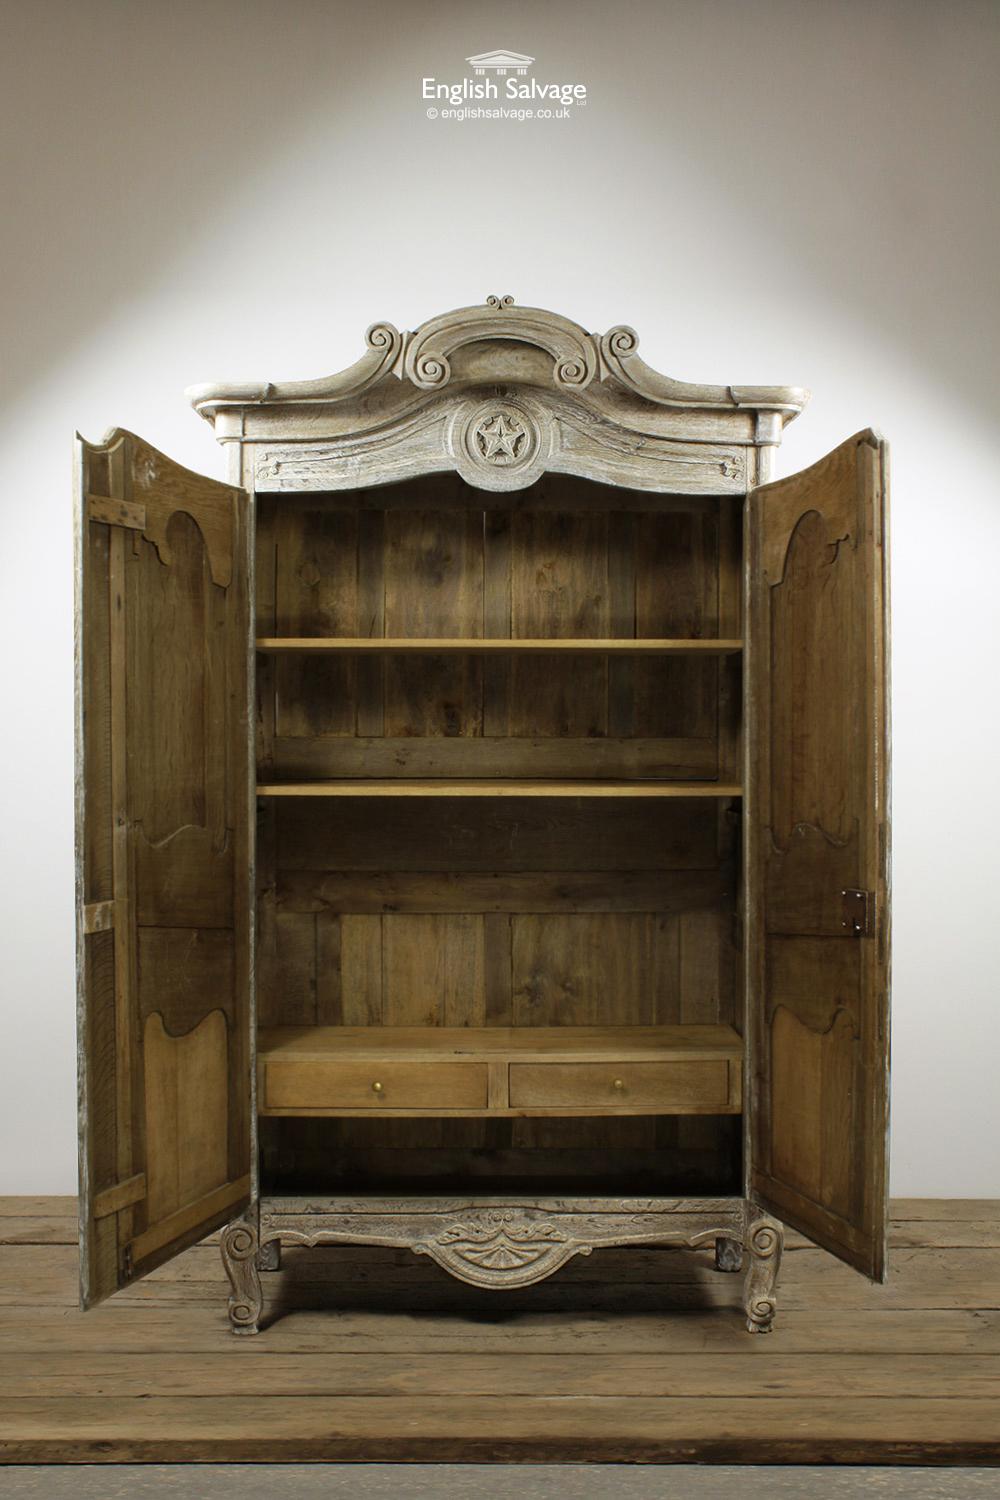 a wardrobe that is ornate or antique